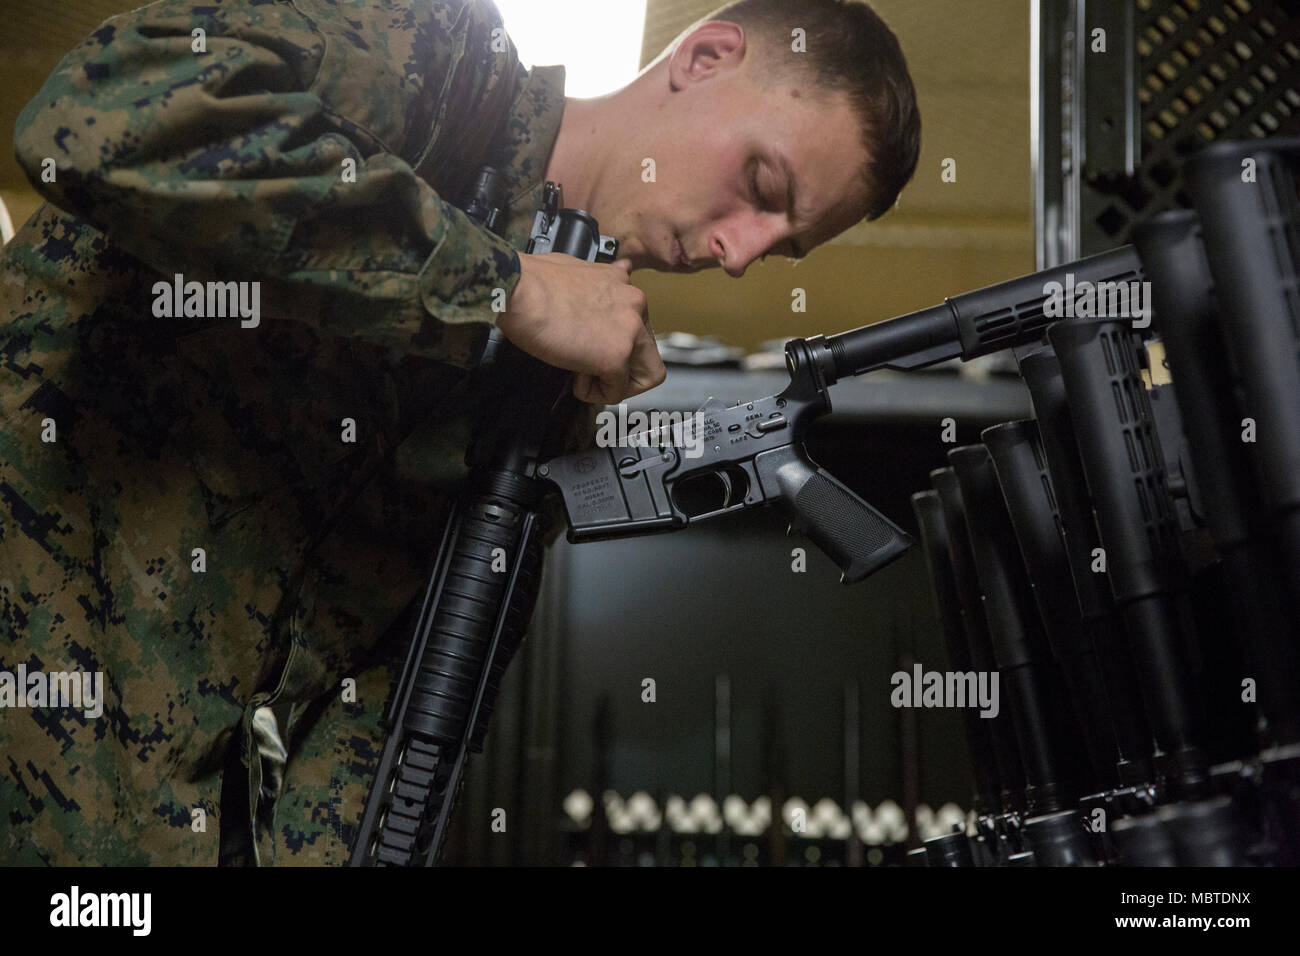 LCpl. Jacob Cooper, Victorville, Calif., a 2111 Armorer with Headquarters and Support Bn., Marine Corps Base Camp Pendleton, examines the condition of the lower receiver of an M16A4 rifle during a pre-fire inspection Jan 8, 2018. Prior to an upcoming event or range, limited technical inspections and pre-fire inspections are conducted, ensuring that each weapon is fully operational and cleared for use. (U.S. Marine Corps Photo by LCpl. Dylan Chagnon) Stock Photo